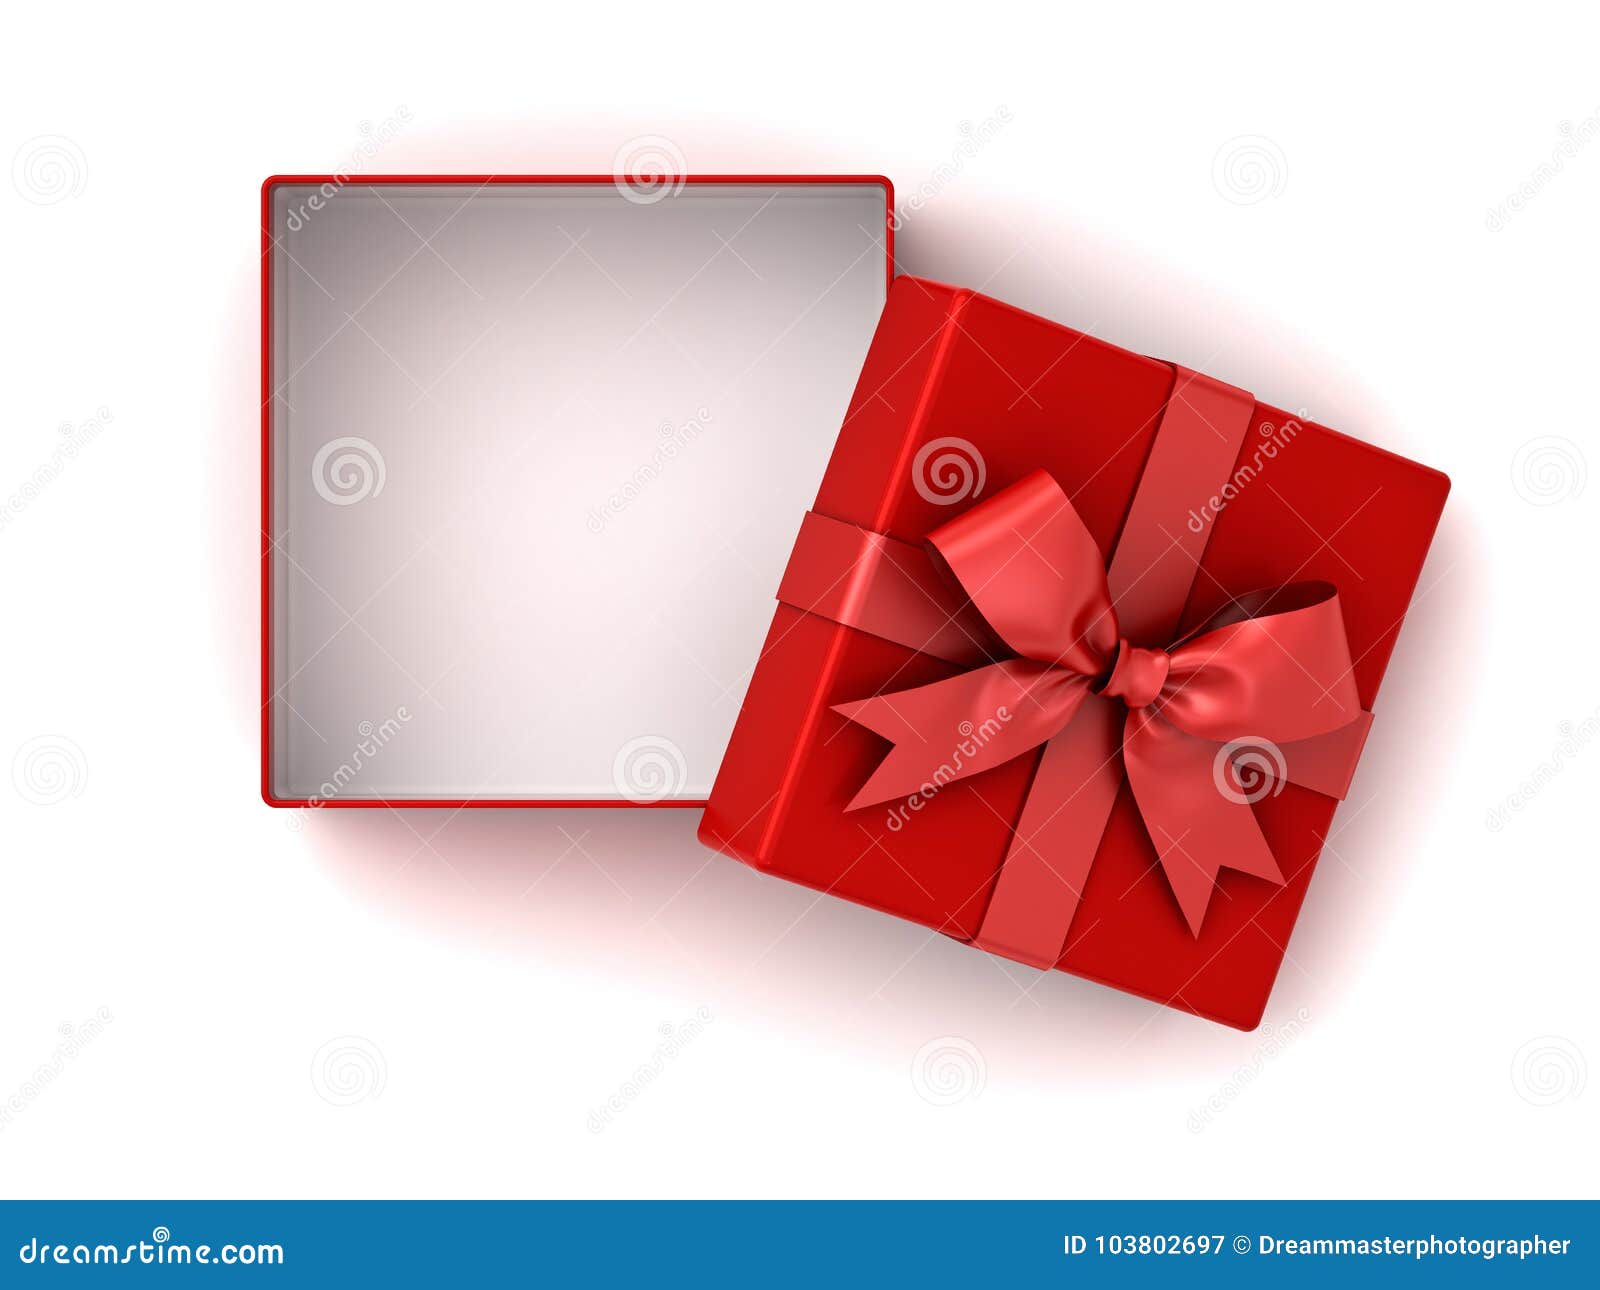 Red Gift Box , Red Present Box with Red Ribbon Bow and Empty Space in the Box Isolated on White Background Stock Illustration - Illustration of color, packet: 103802697